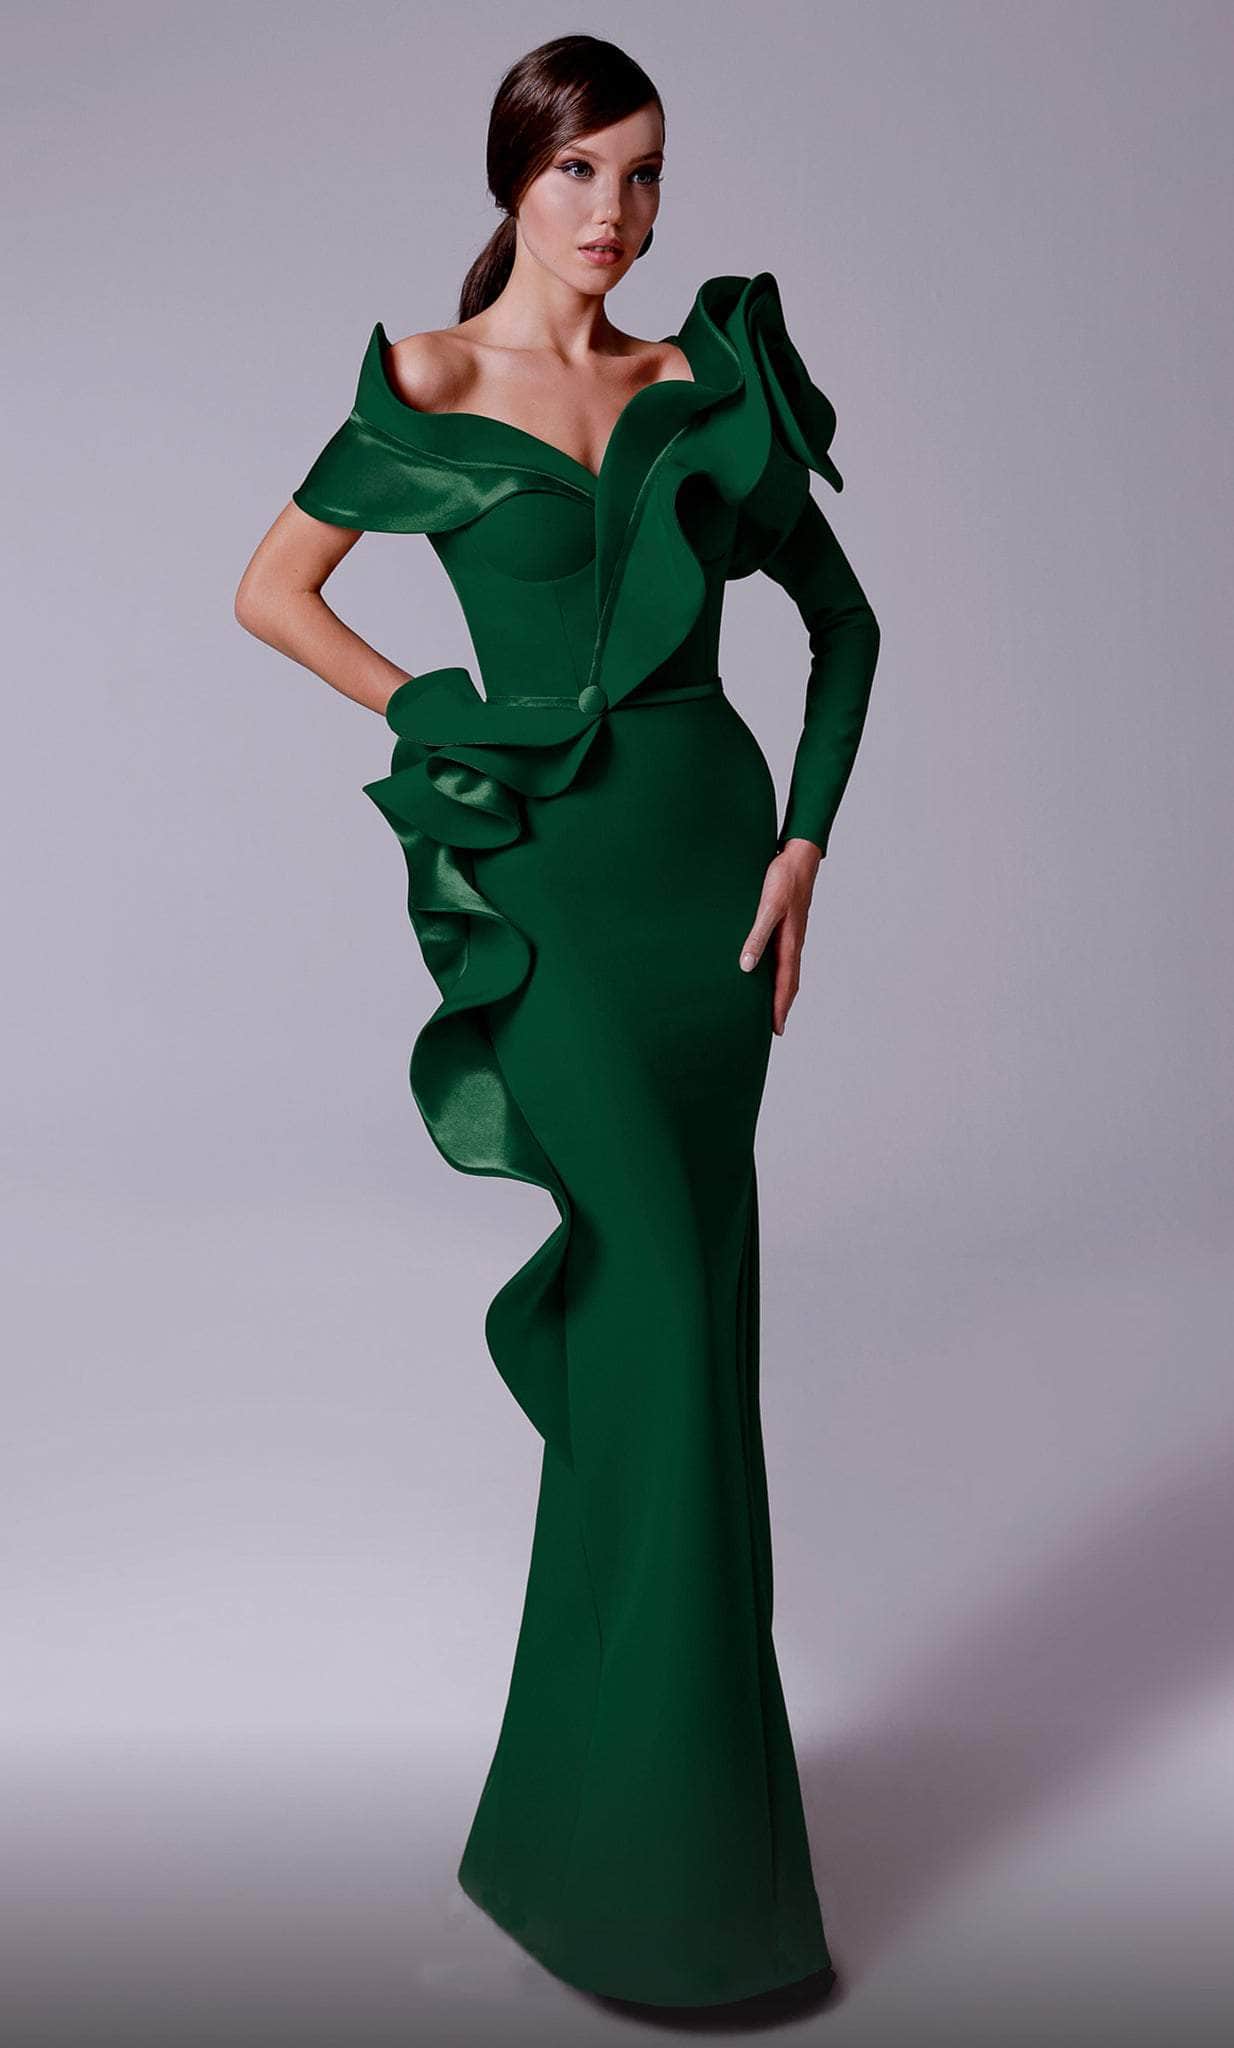 MNM Couture 2714 - Ruffled Detail Mermaid Evening Gown Evening Dresses 4 / Green